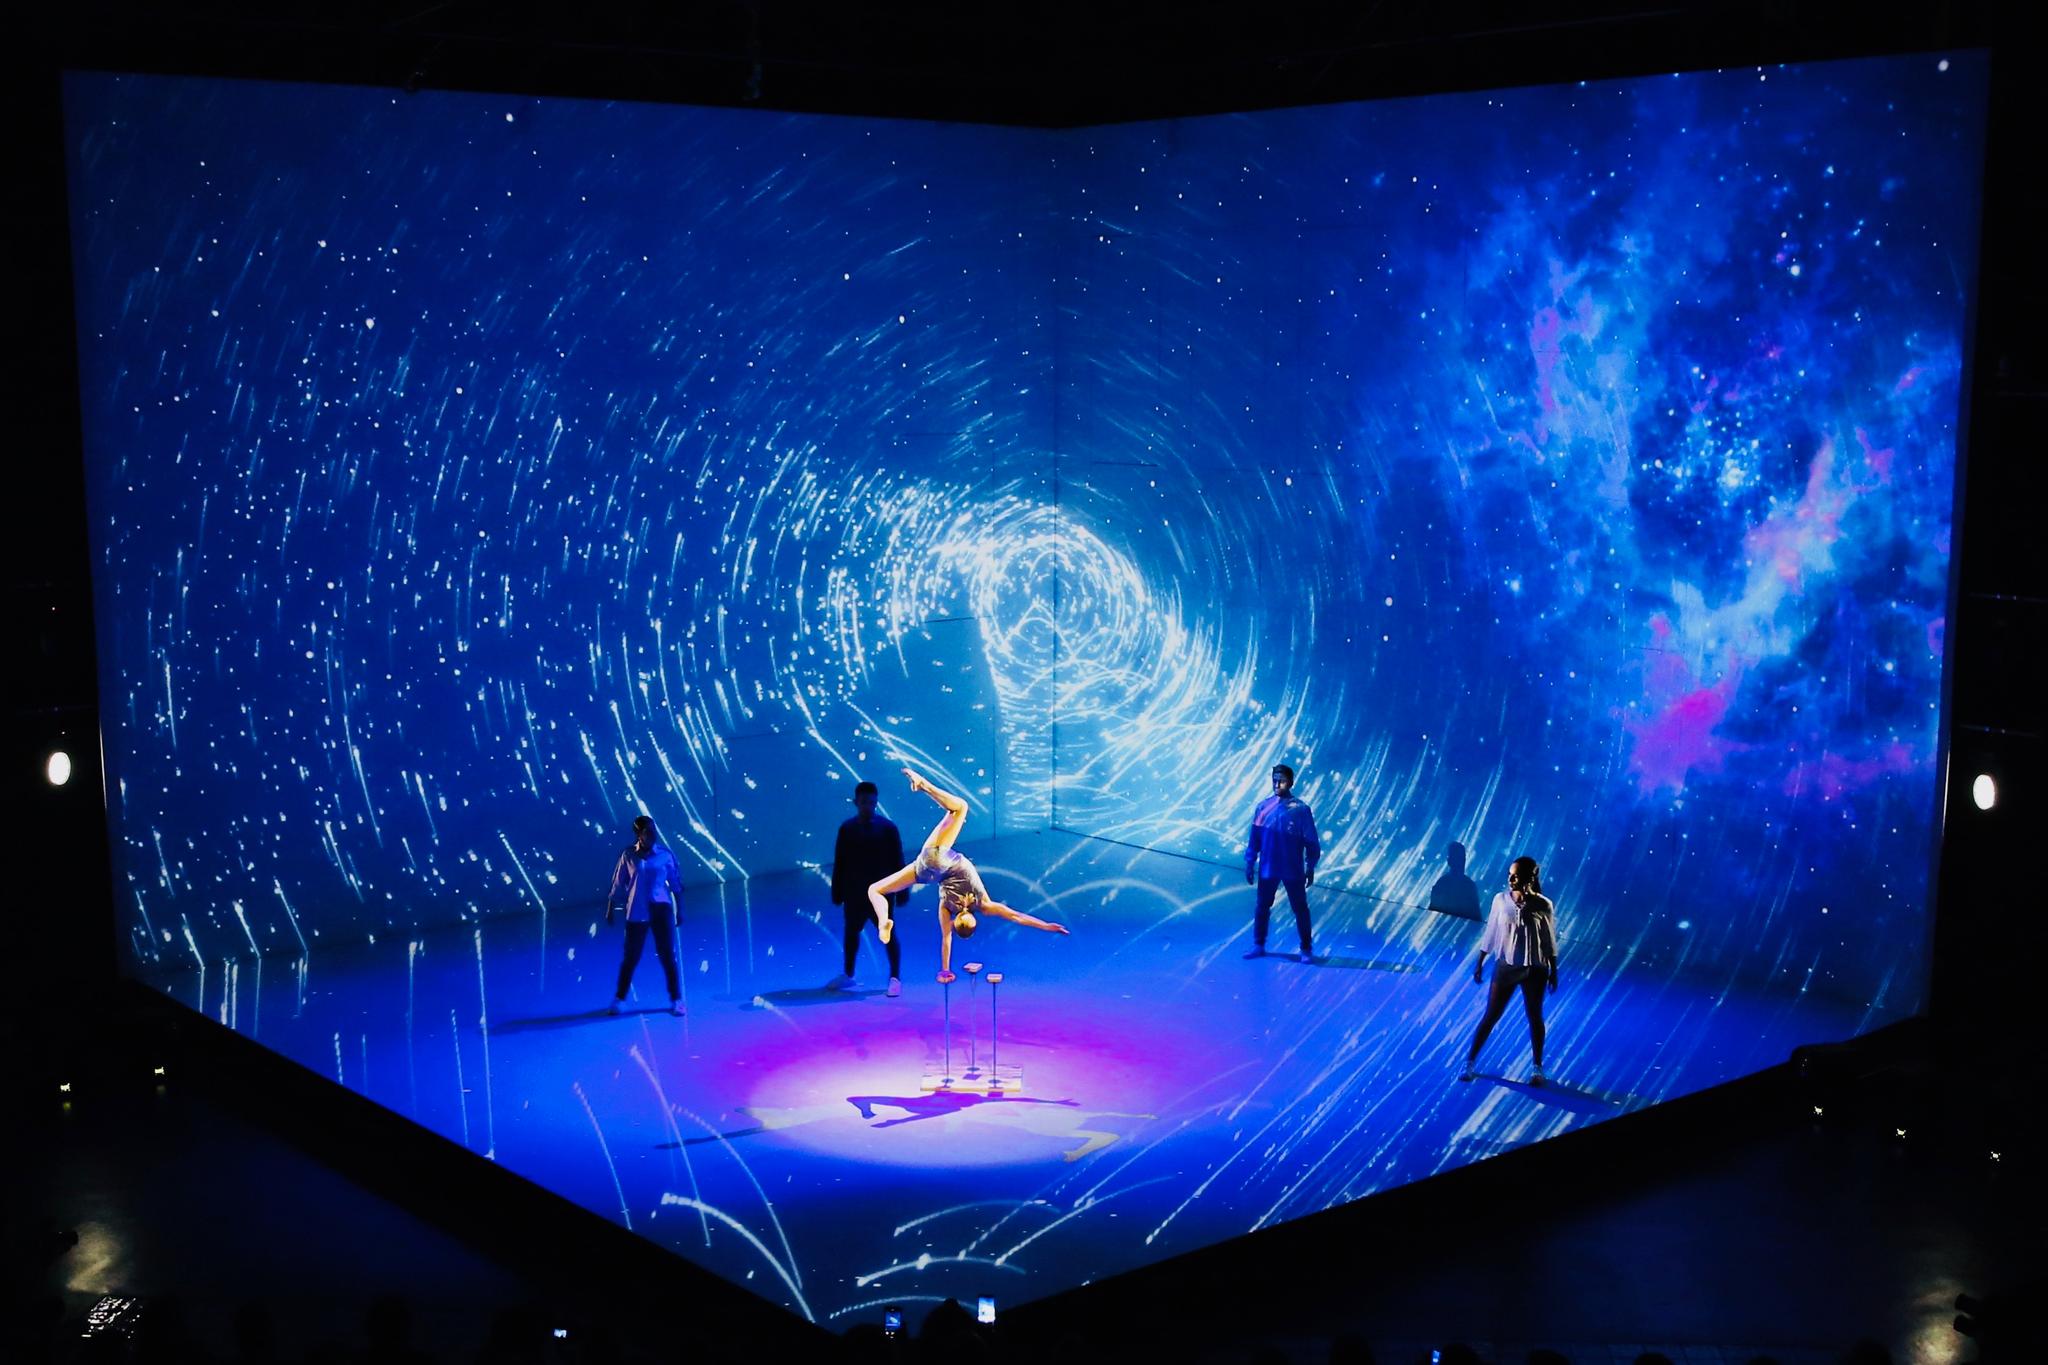 5 people are on a stage that is like a cube that's had 3 sides taken off so we can see inside of it. in the center, there is an acrobat doing a handstand with one hand on a thin, circular pedestal. The acrobat is highlighted by a spotlight, and 4 people stand far apart, framing her. The entire stage is bathed in a projection of a blue, swirling scene of outer space.